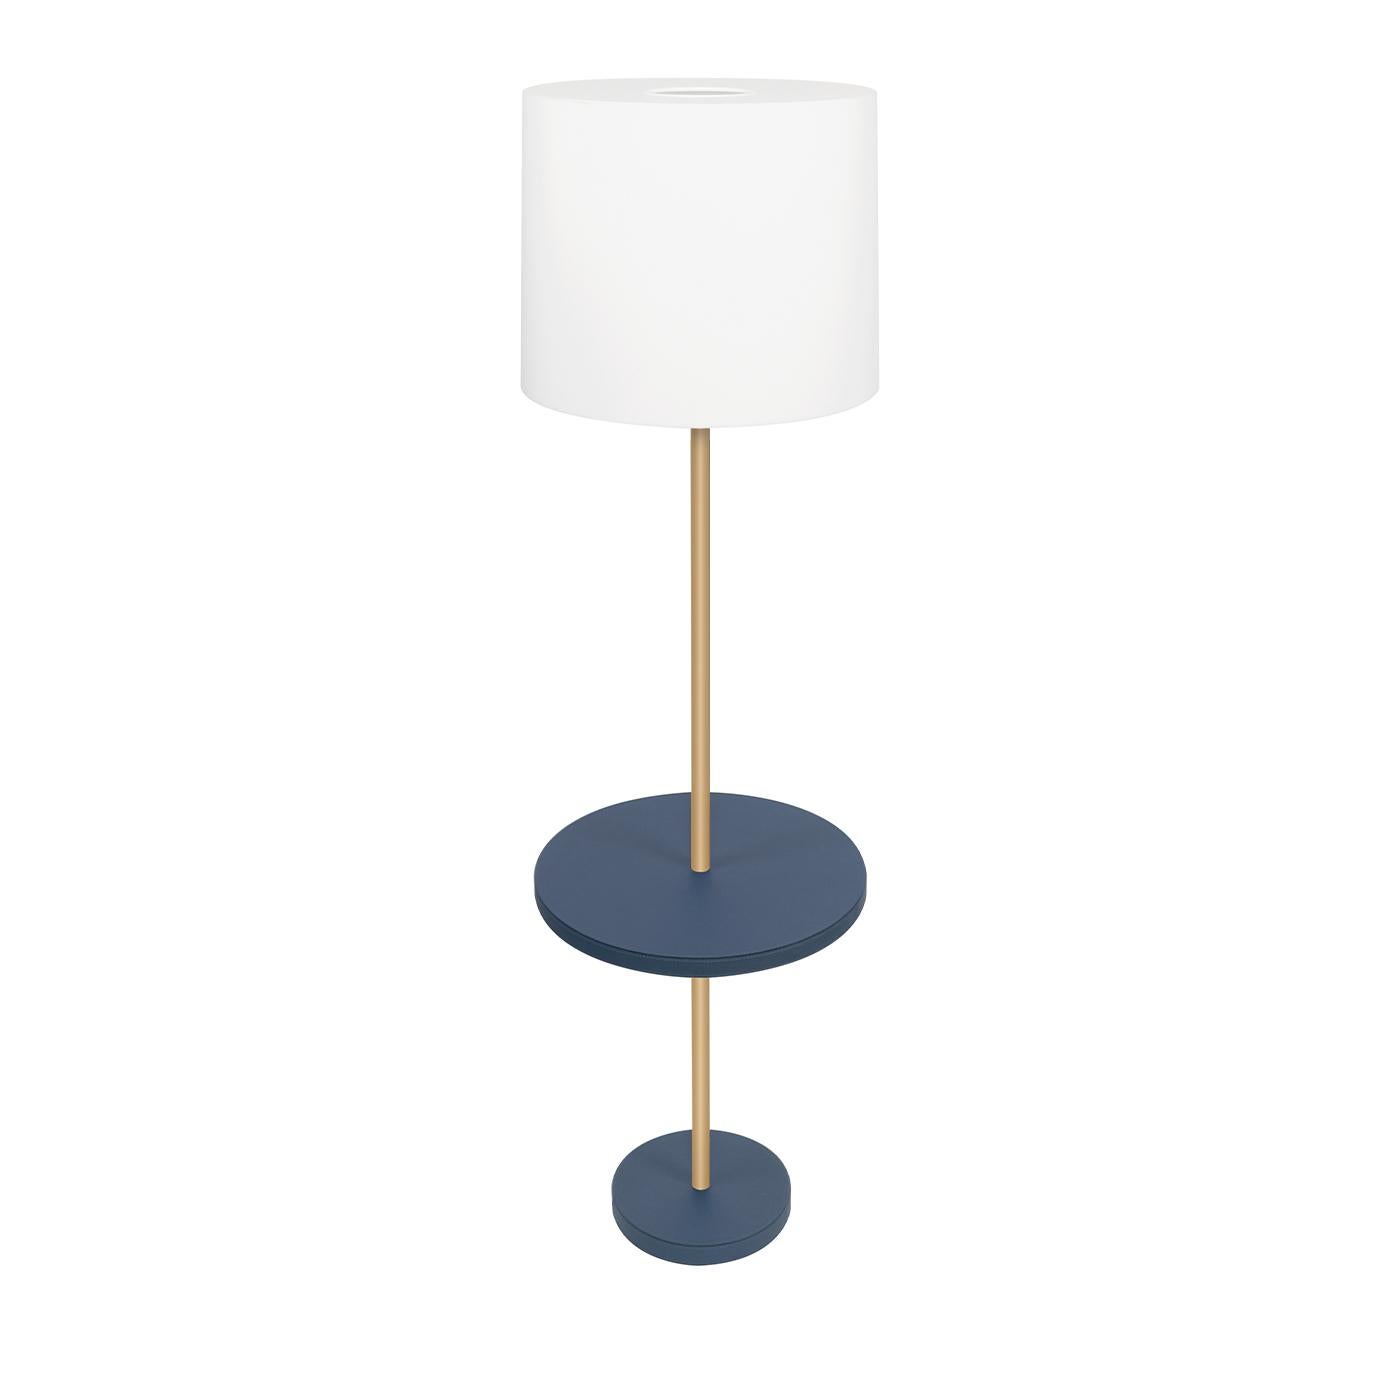 The Frisio floor lamp is an easy-on-the-eyes design that delivers a stylish way to light up a reading nook or entryway while adding extra functions along the way. Topped with a cylindrical white linen shade lined with a fireproof diffuser, the